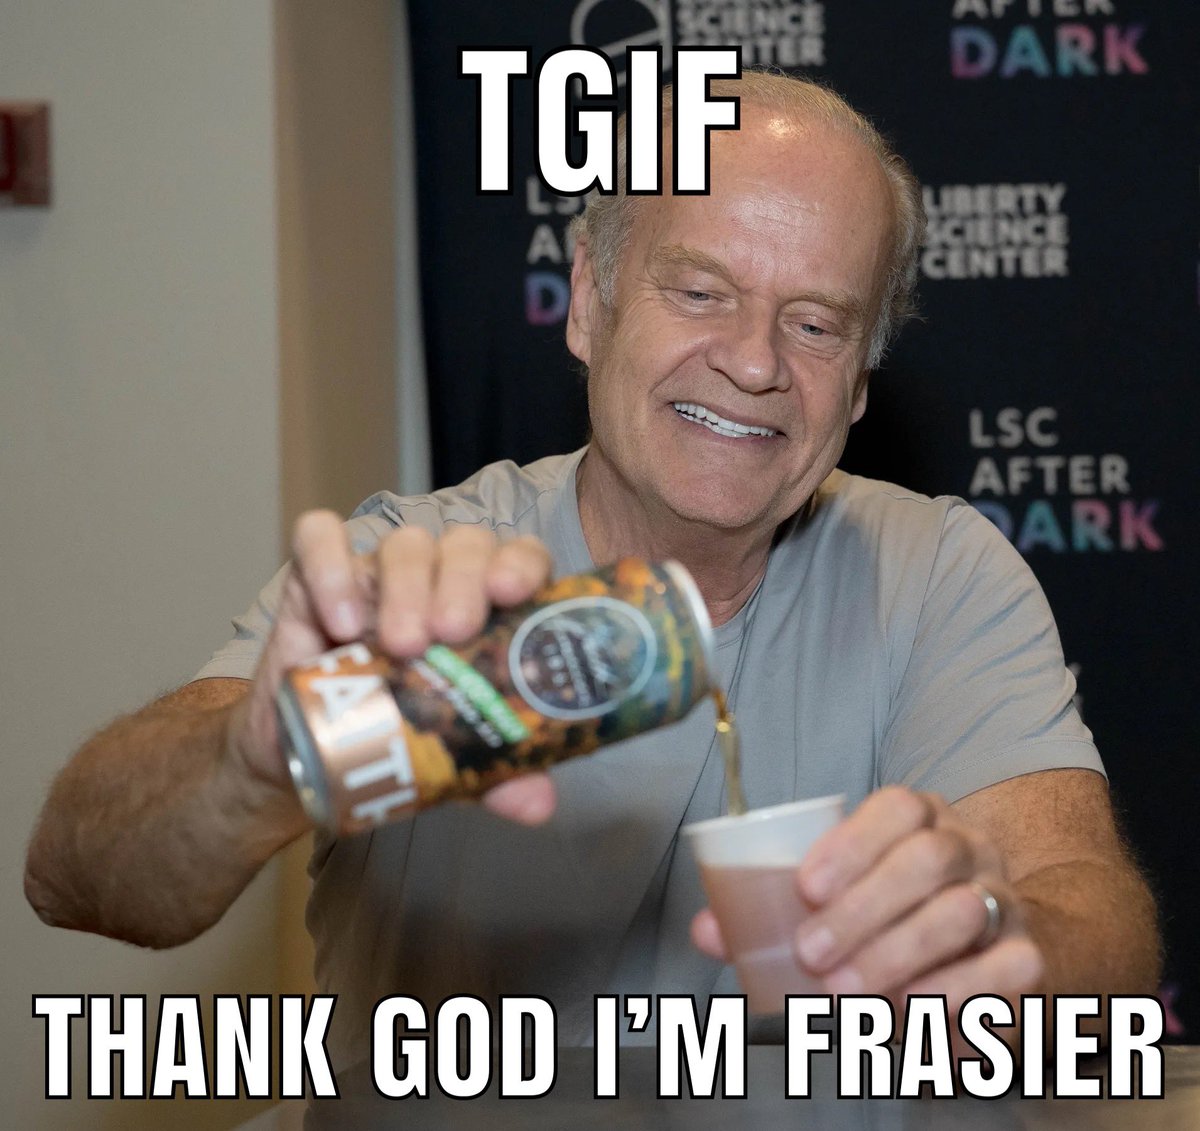 *extremely getting started voice* Folks,